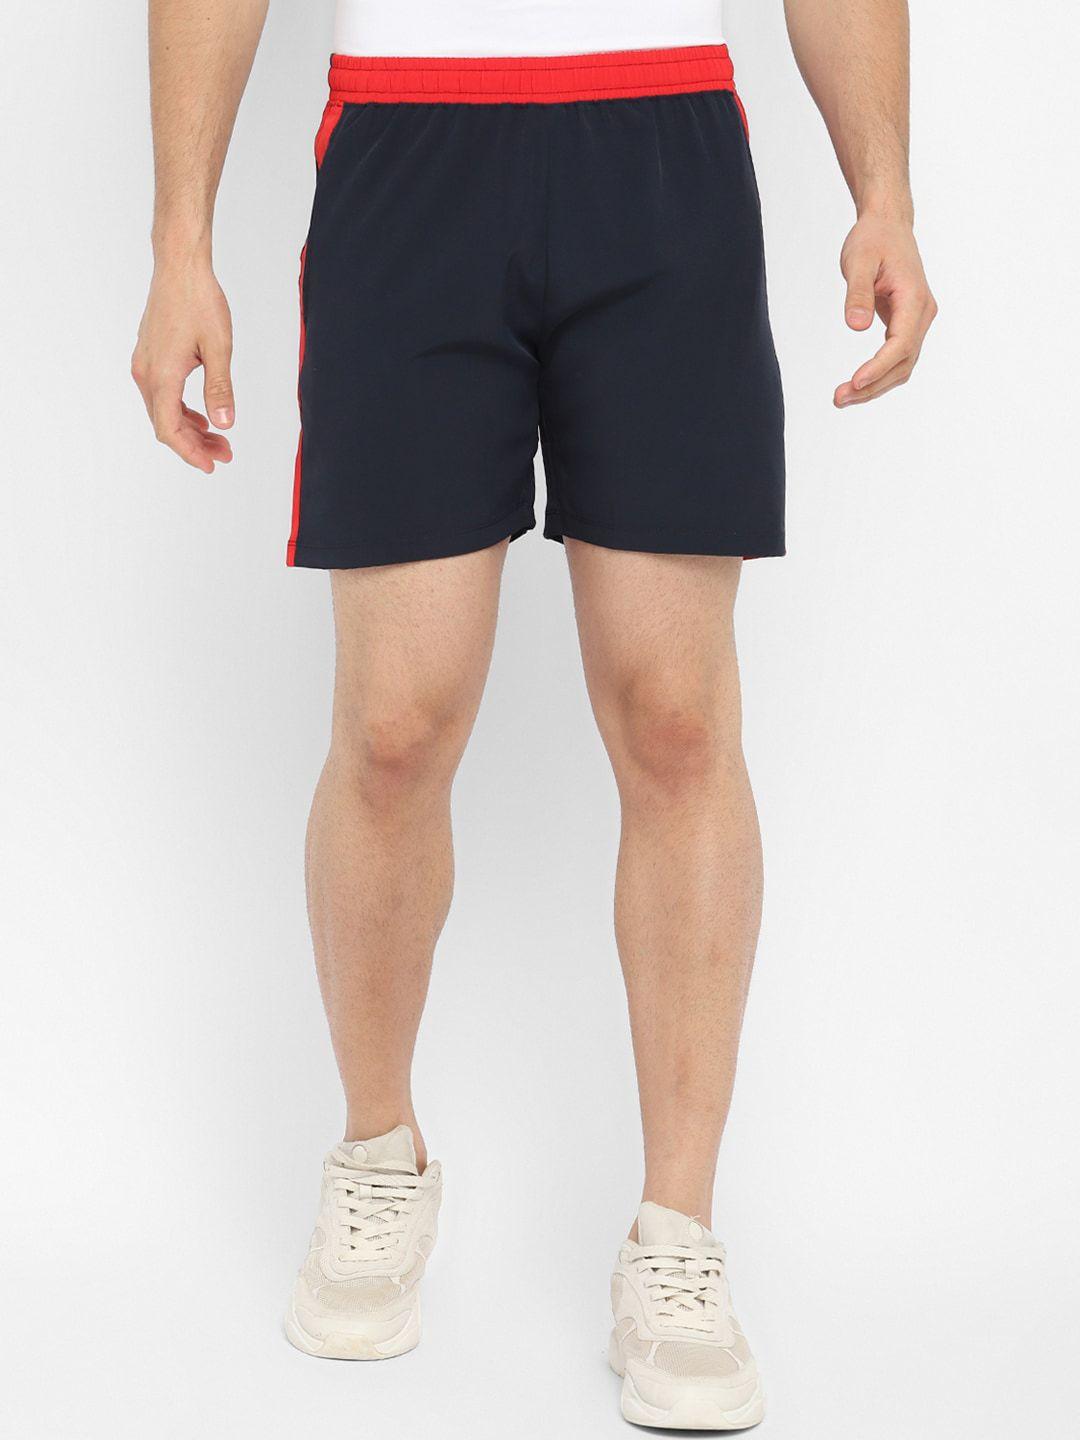 off-limits-men-navy-blue-training-or-gym-sports-shorts-with-antimicrobial-technology